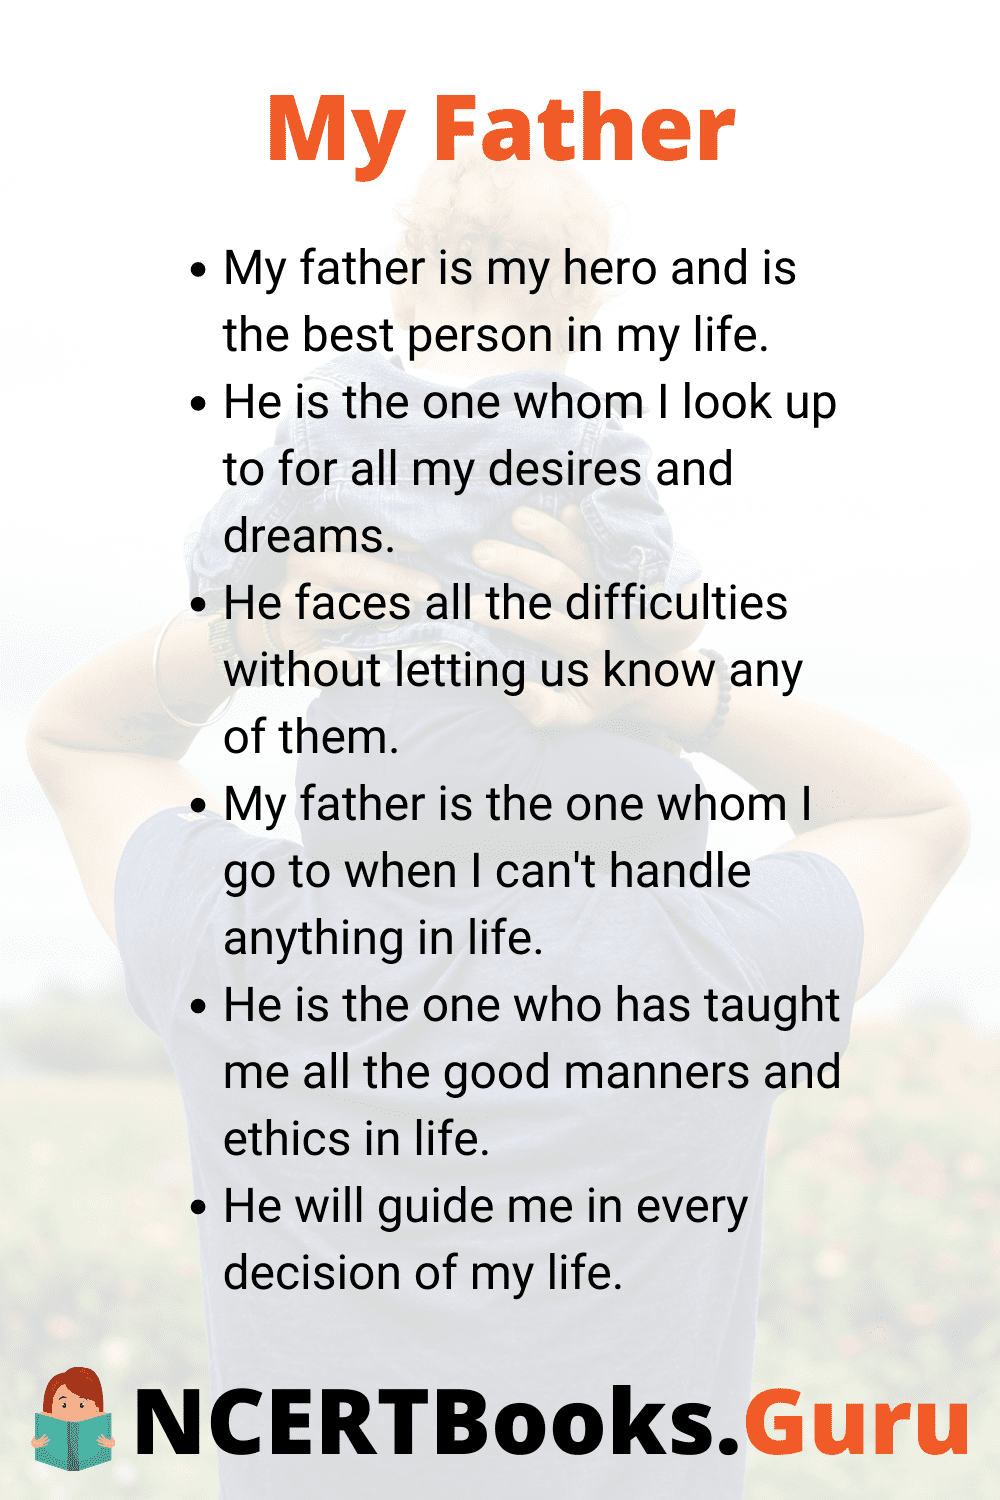 my favorite person is my father essay